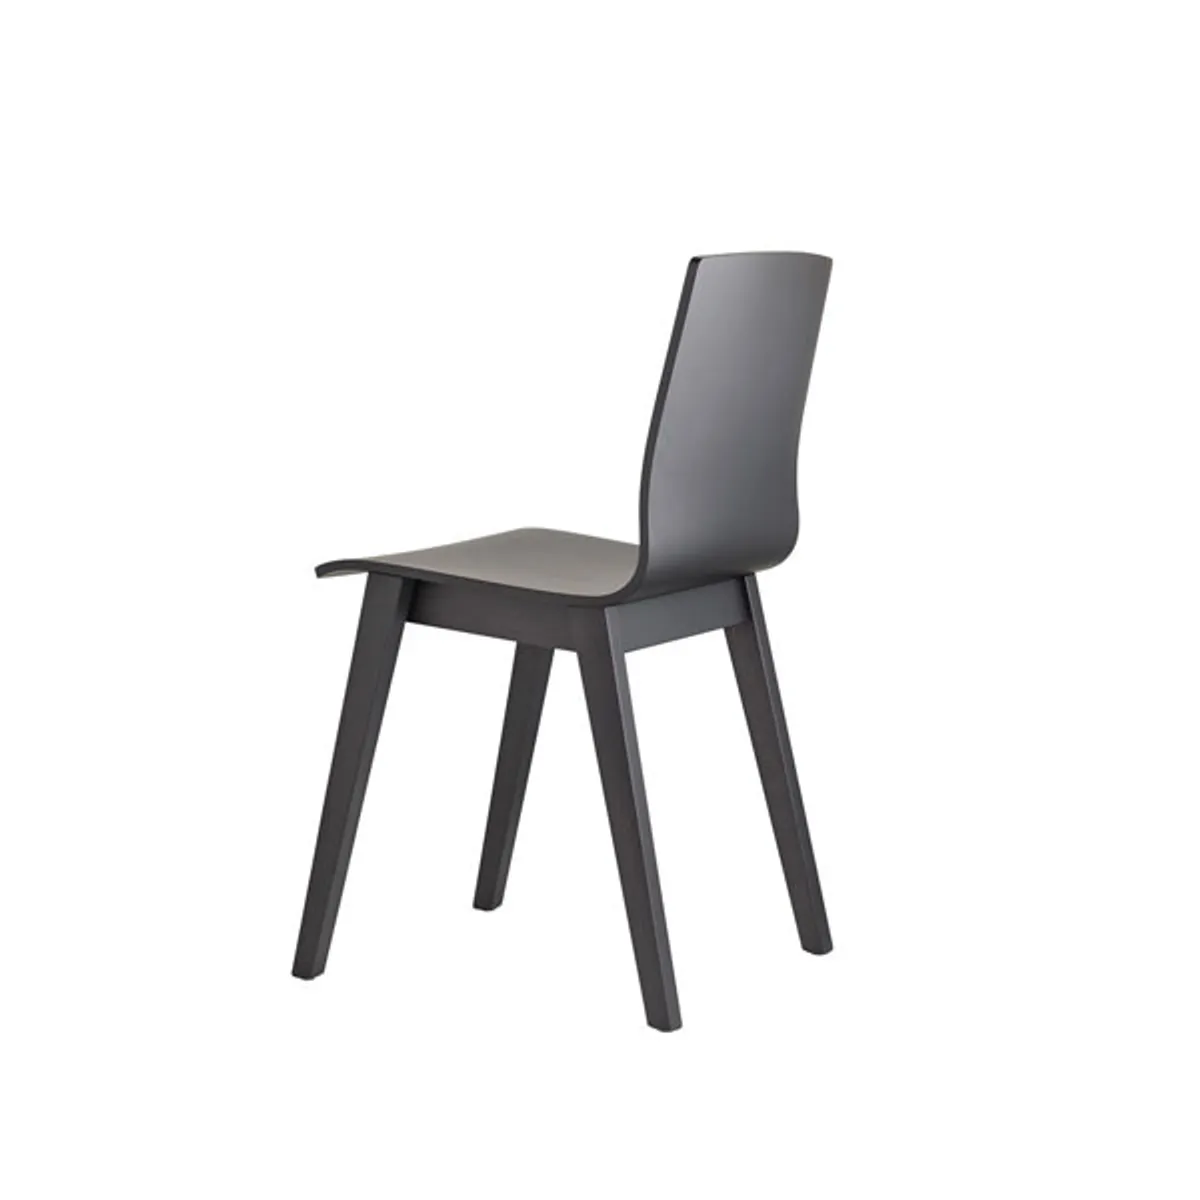 Evie 2 side chair 4 Inside Out Contracts